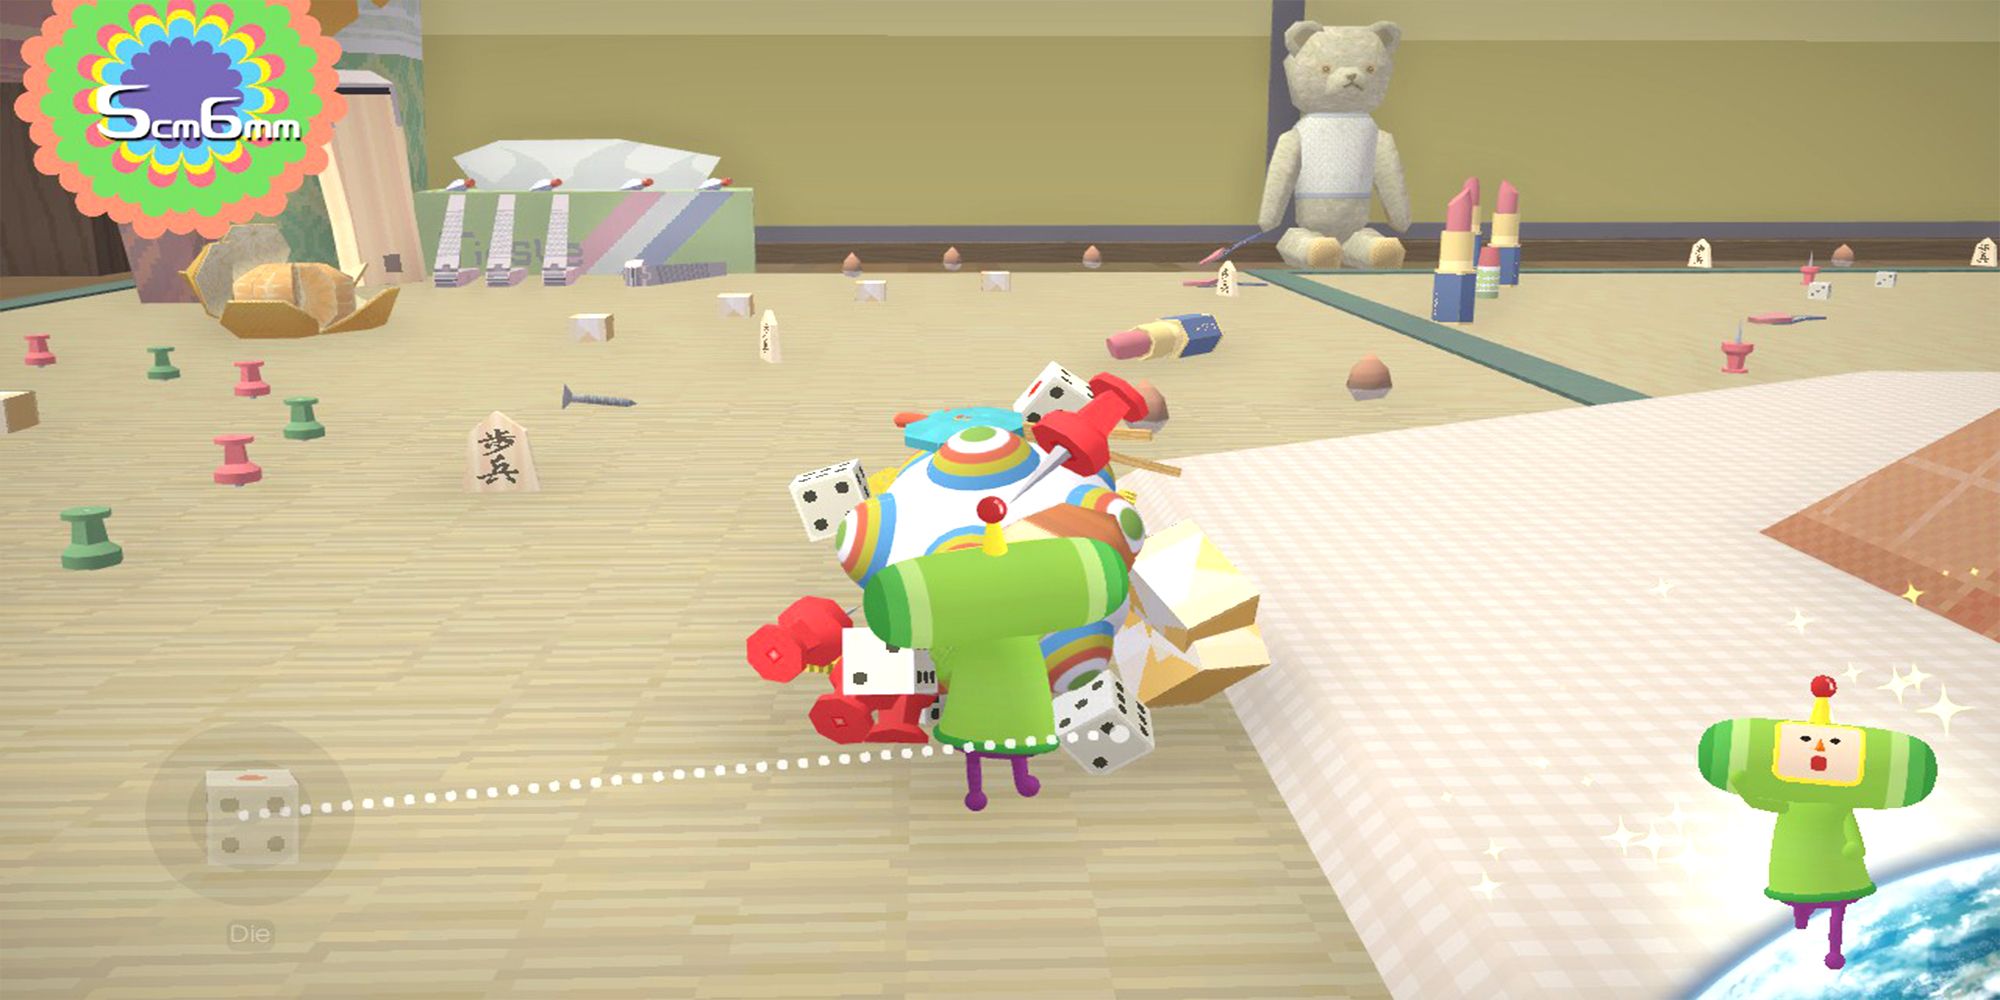 The first level of Katamari, showing the small green protagonist Prince, rolling up small objects such as dice and safety pins on a wooden floor.